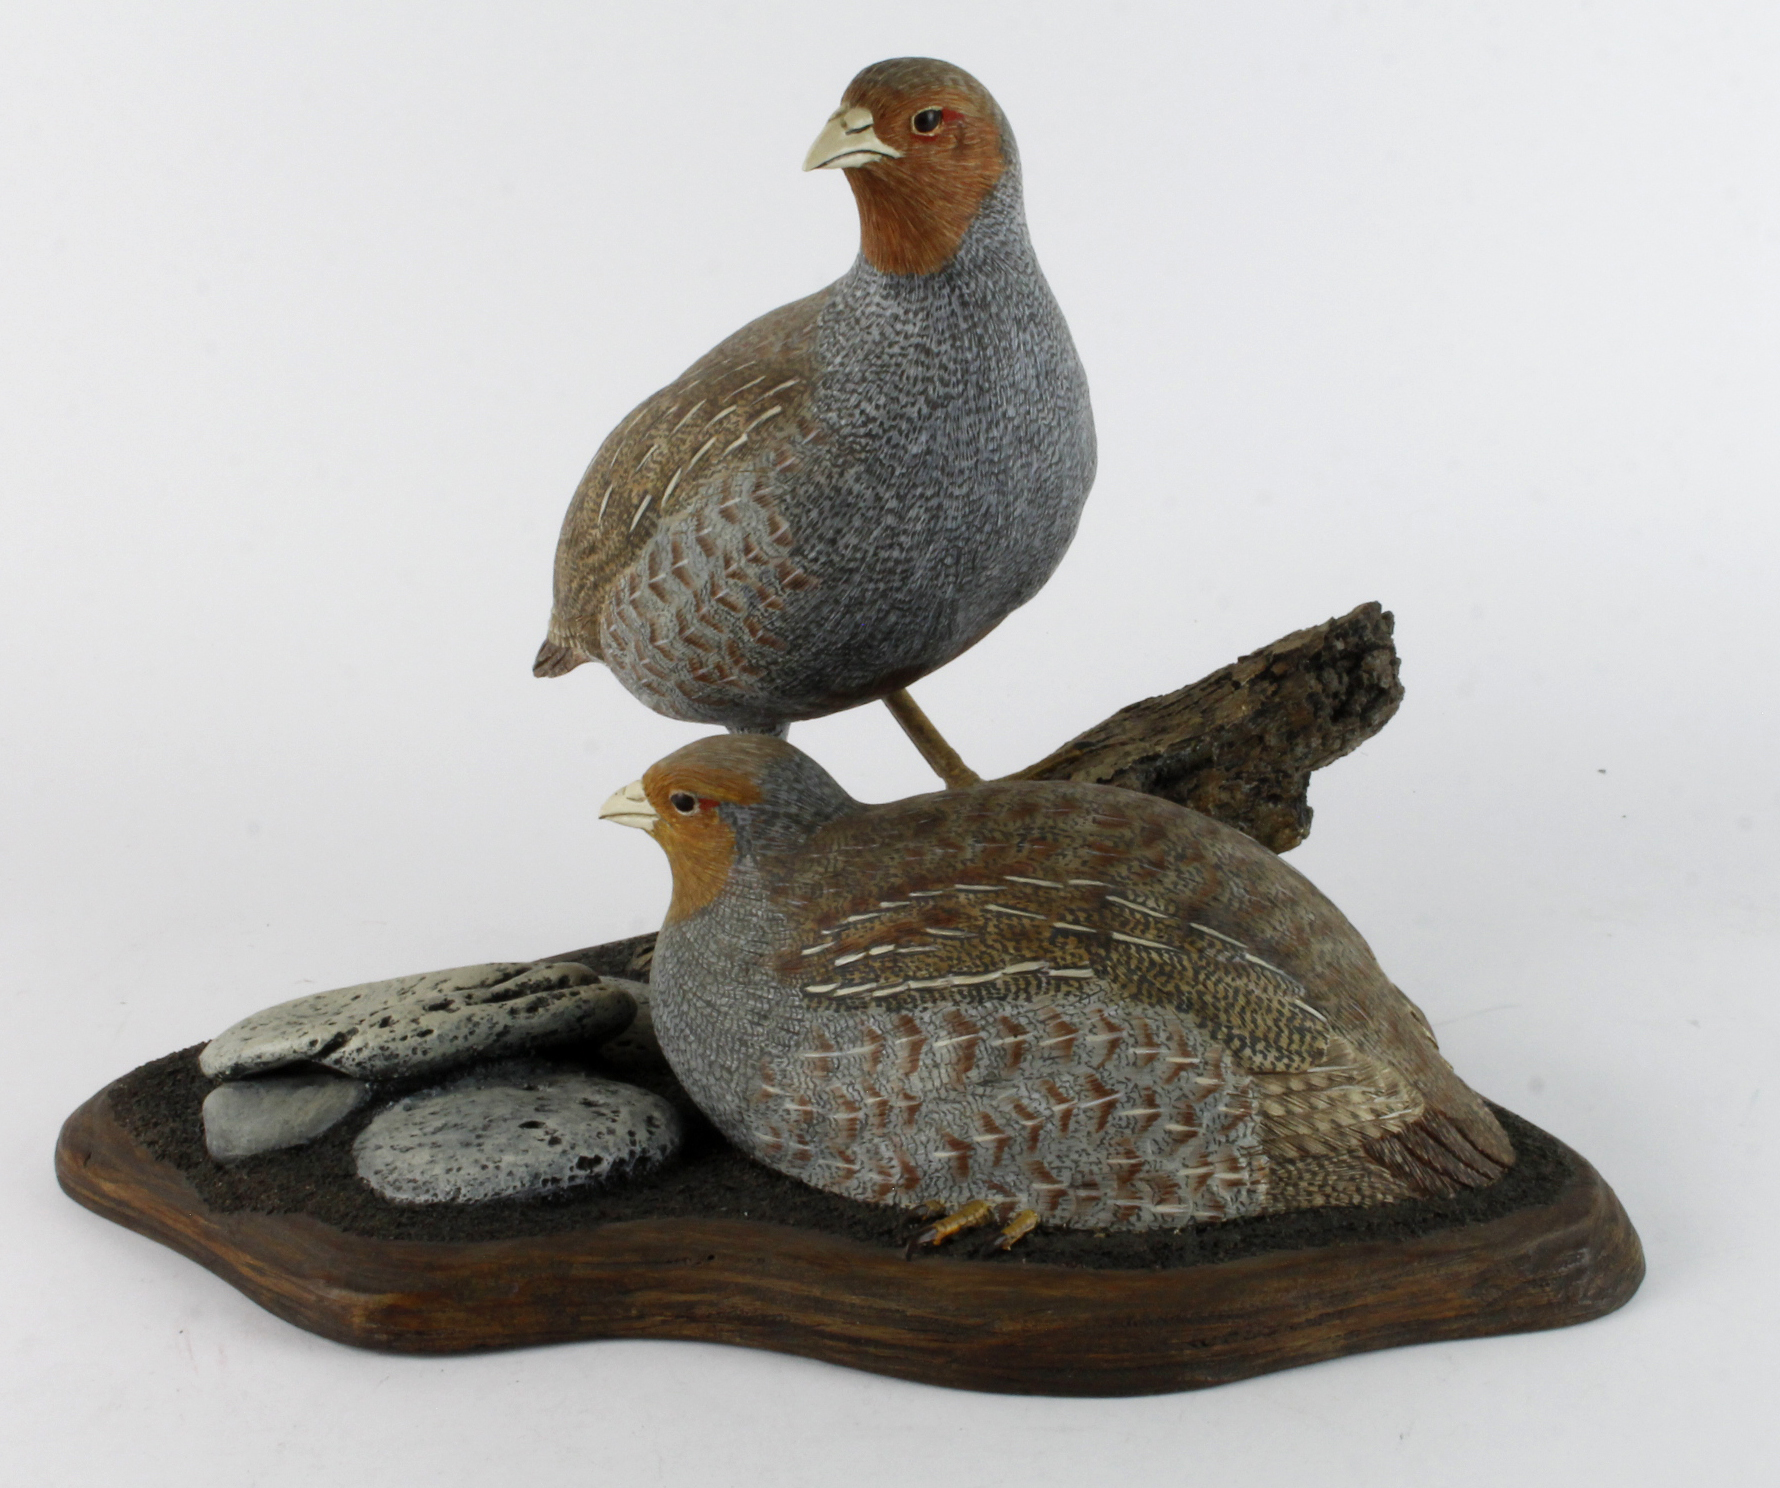 Mike Wood. A carved wood sculpture by Mike wood, titled to base 'Grey Partridge', depicting a pair